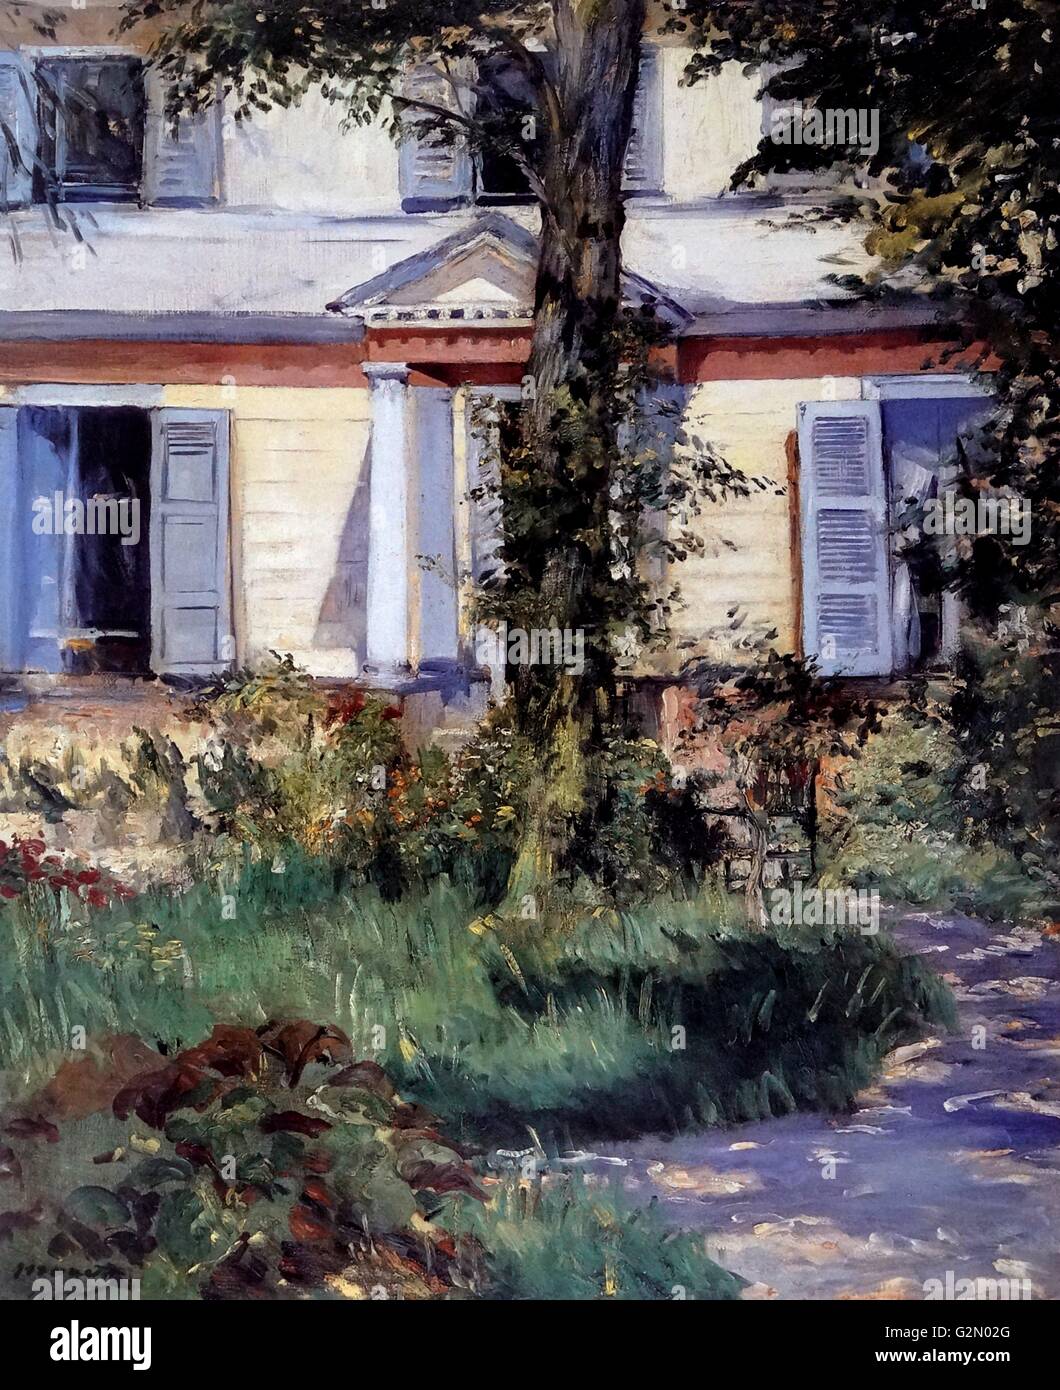 Oil on canvas painting by the French artist Edouard Manet (23rd January 1832 - 30th April 1883), work titled 'The house at rueil'. Completed in 1882. Stock Photo